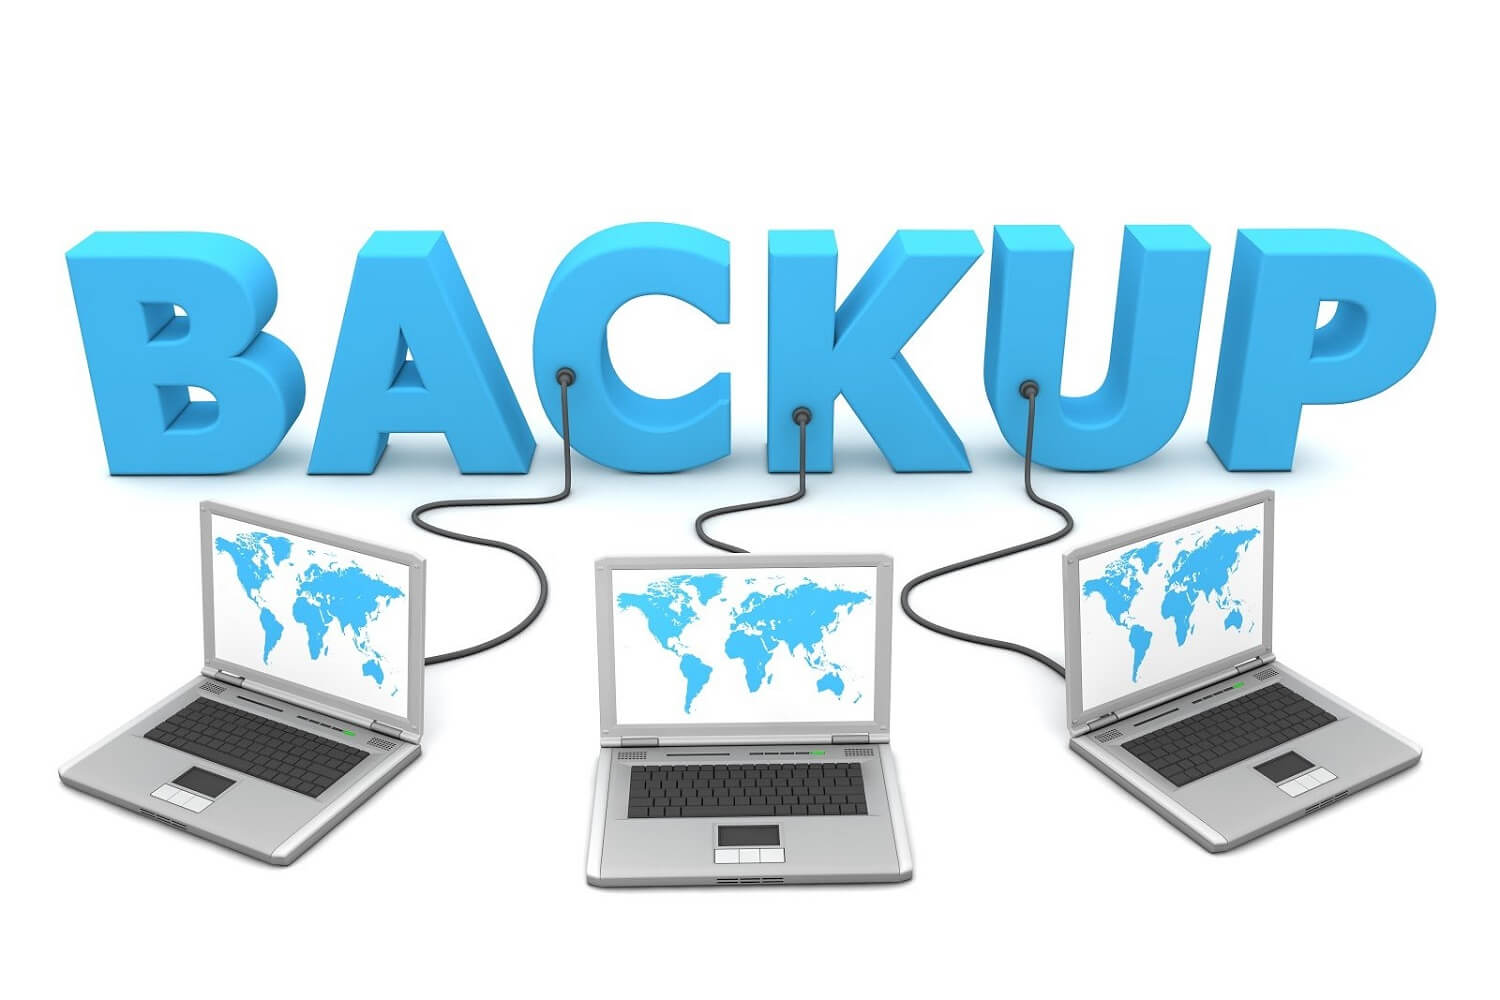 Backup of important documents in case of emergencies and disasters